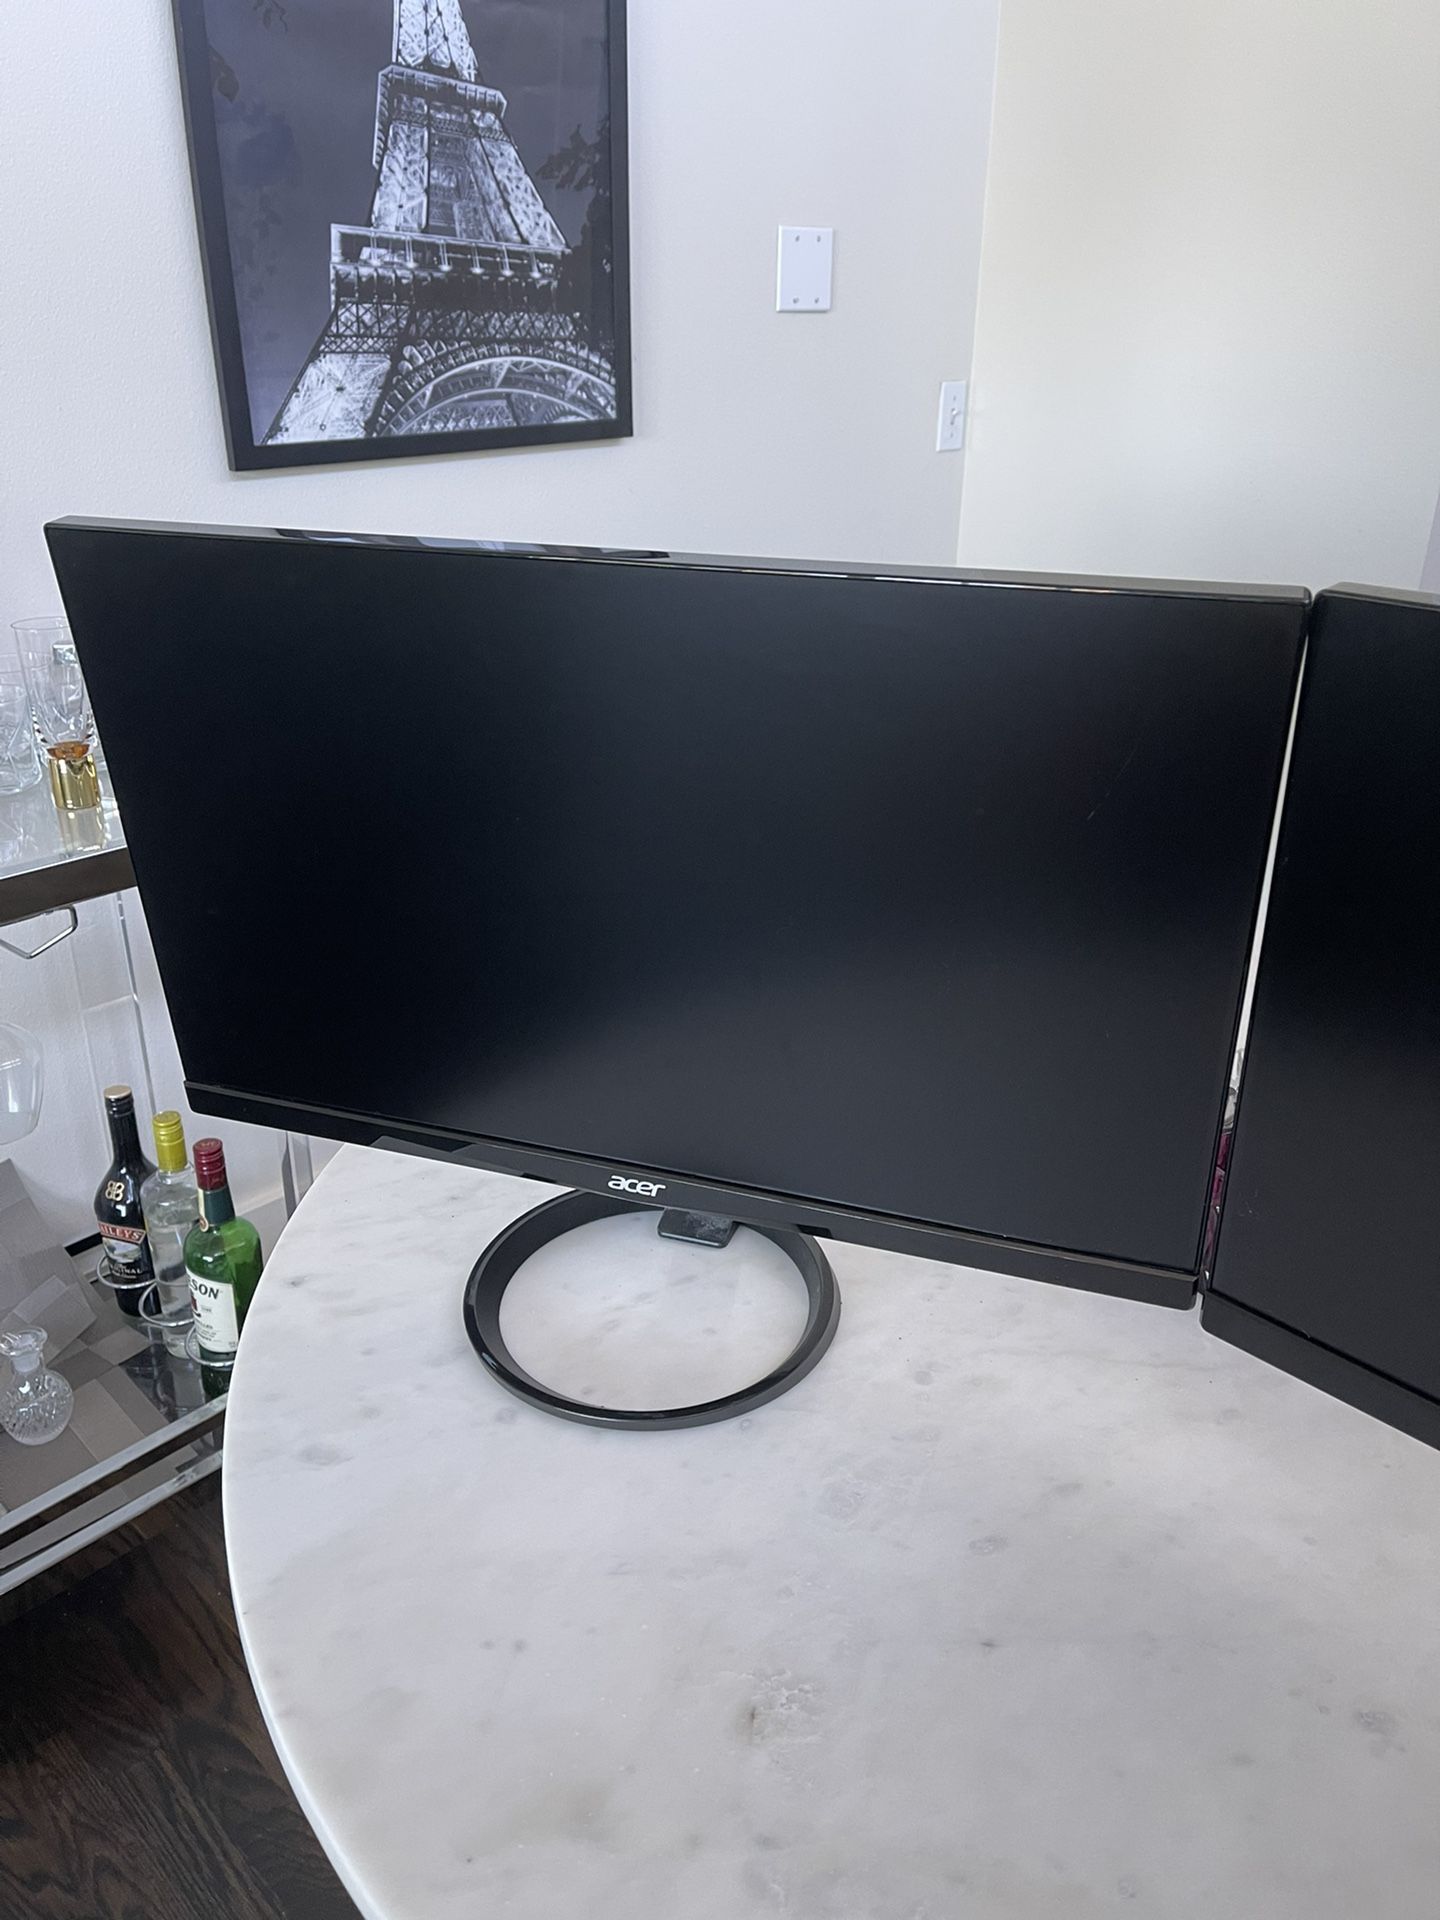 Acer 24” LCD Monitor 